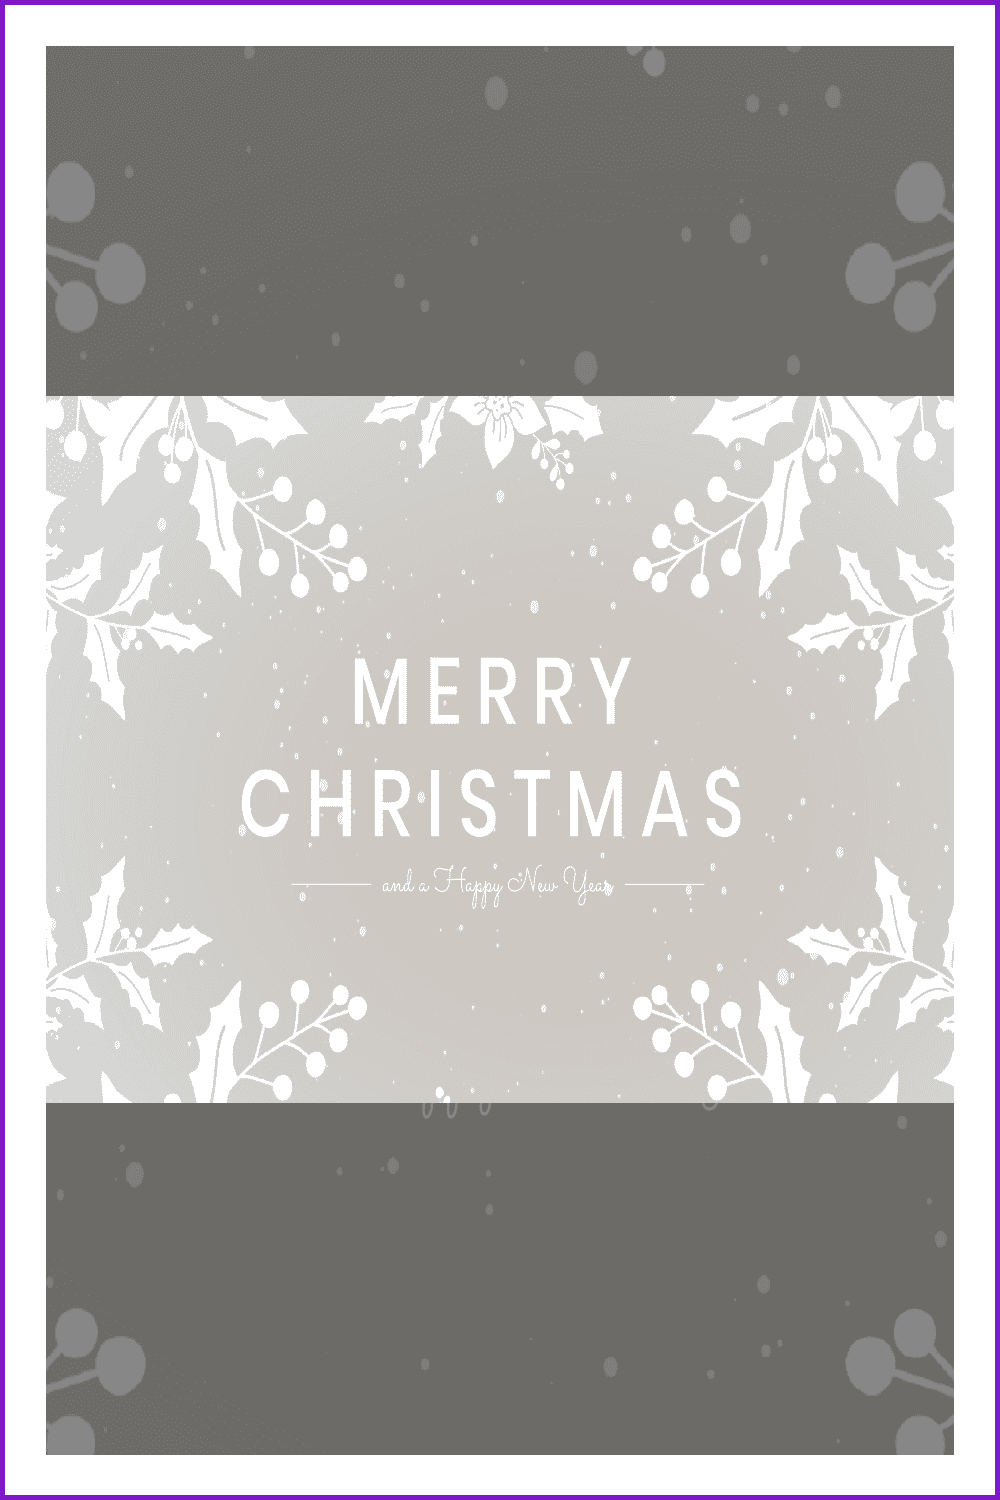 Lettering Merry Christmas on a gray background with white flowers.